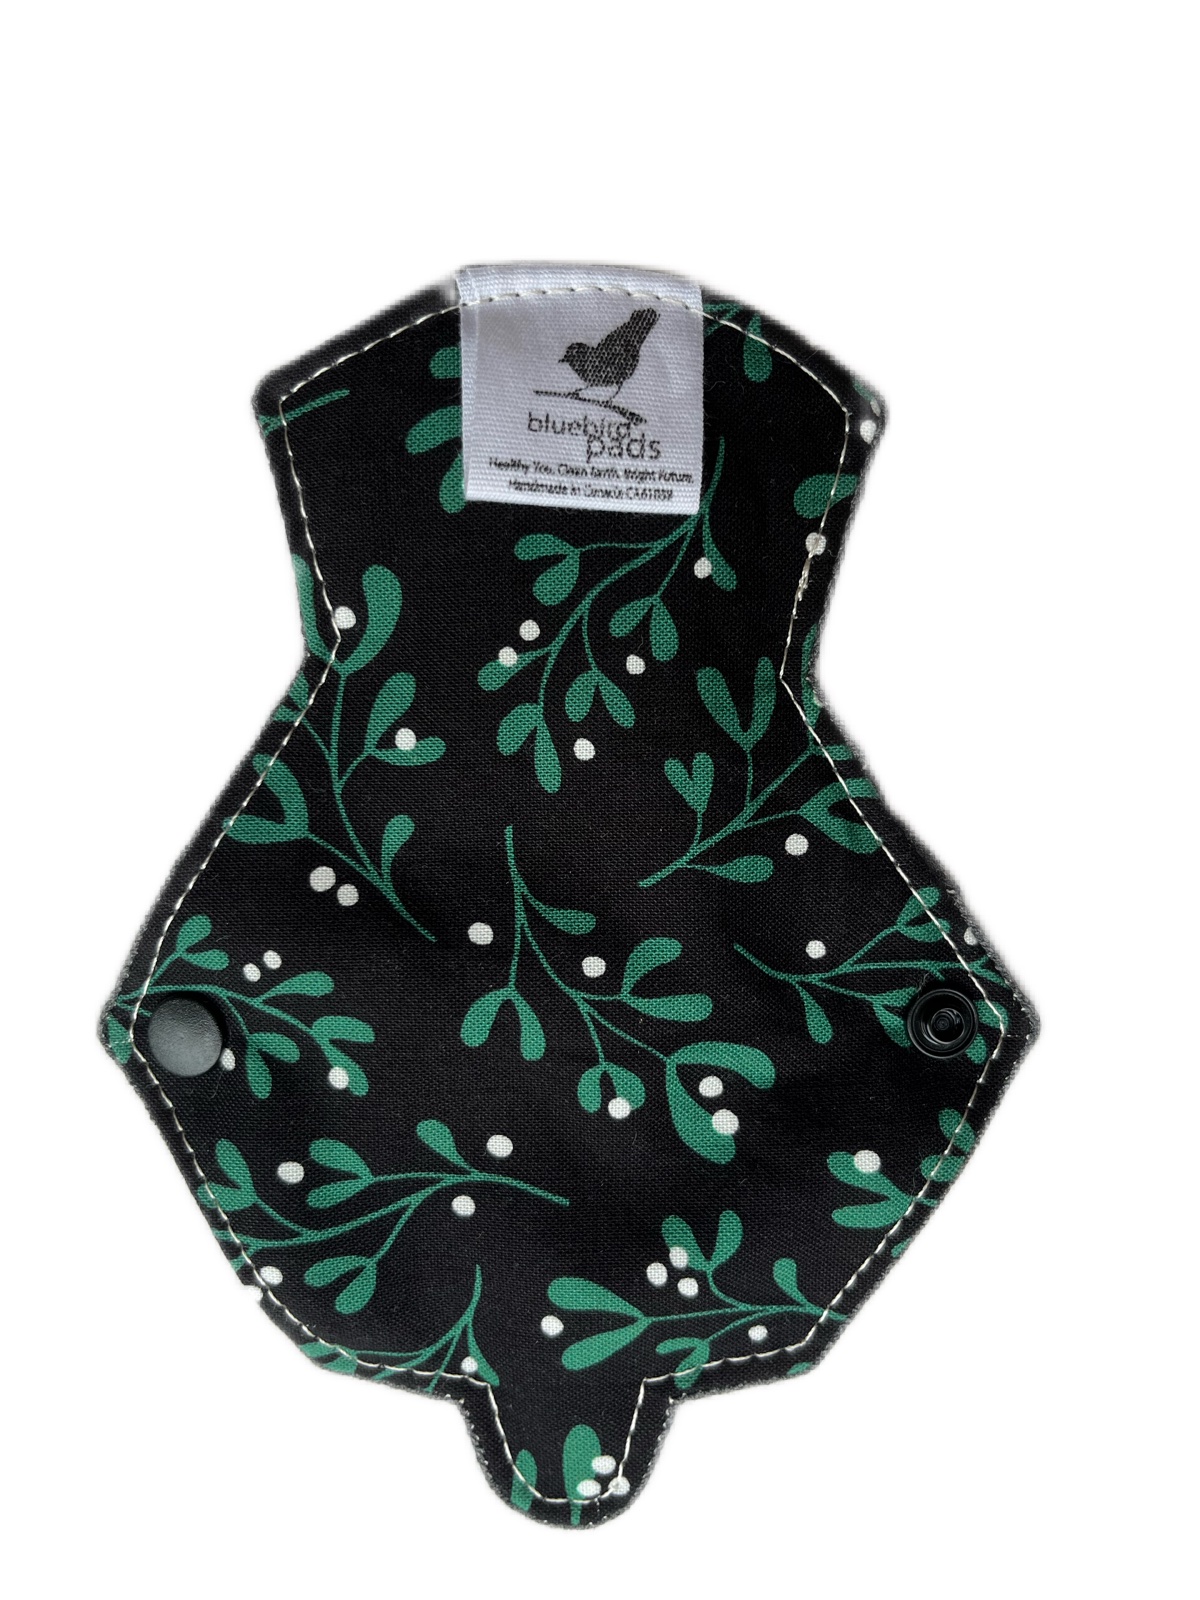 InControl Cloth Diapers & Pads Organic Birdseye Cotton Booster Pad